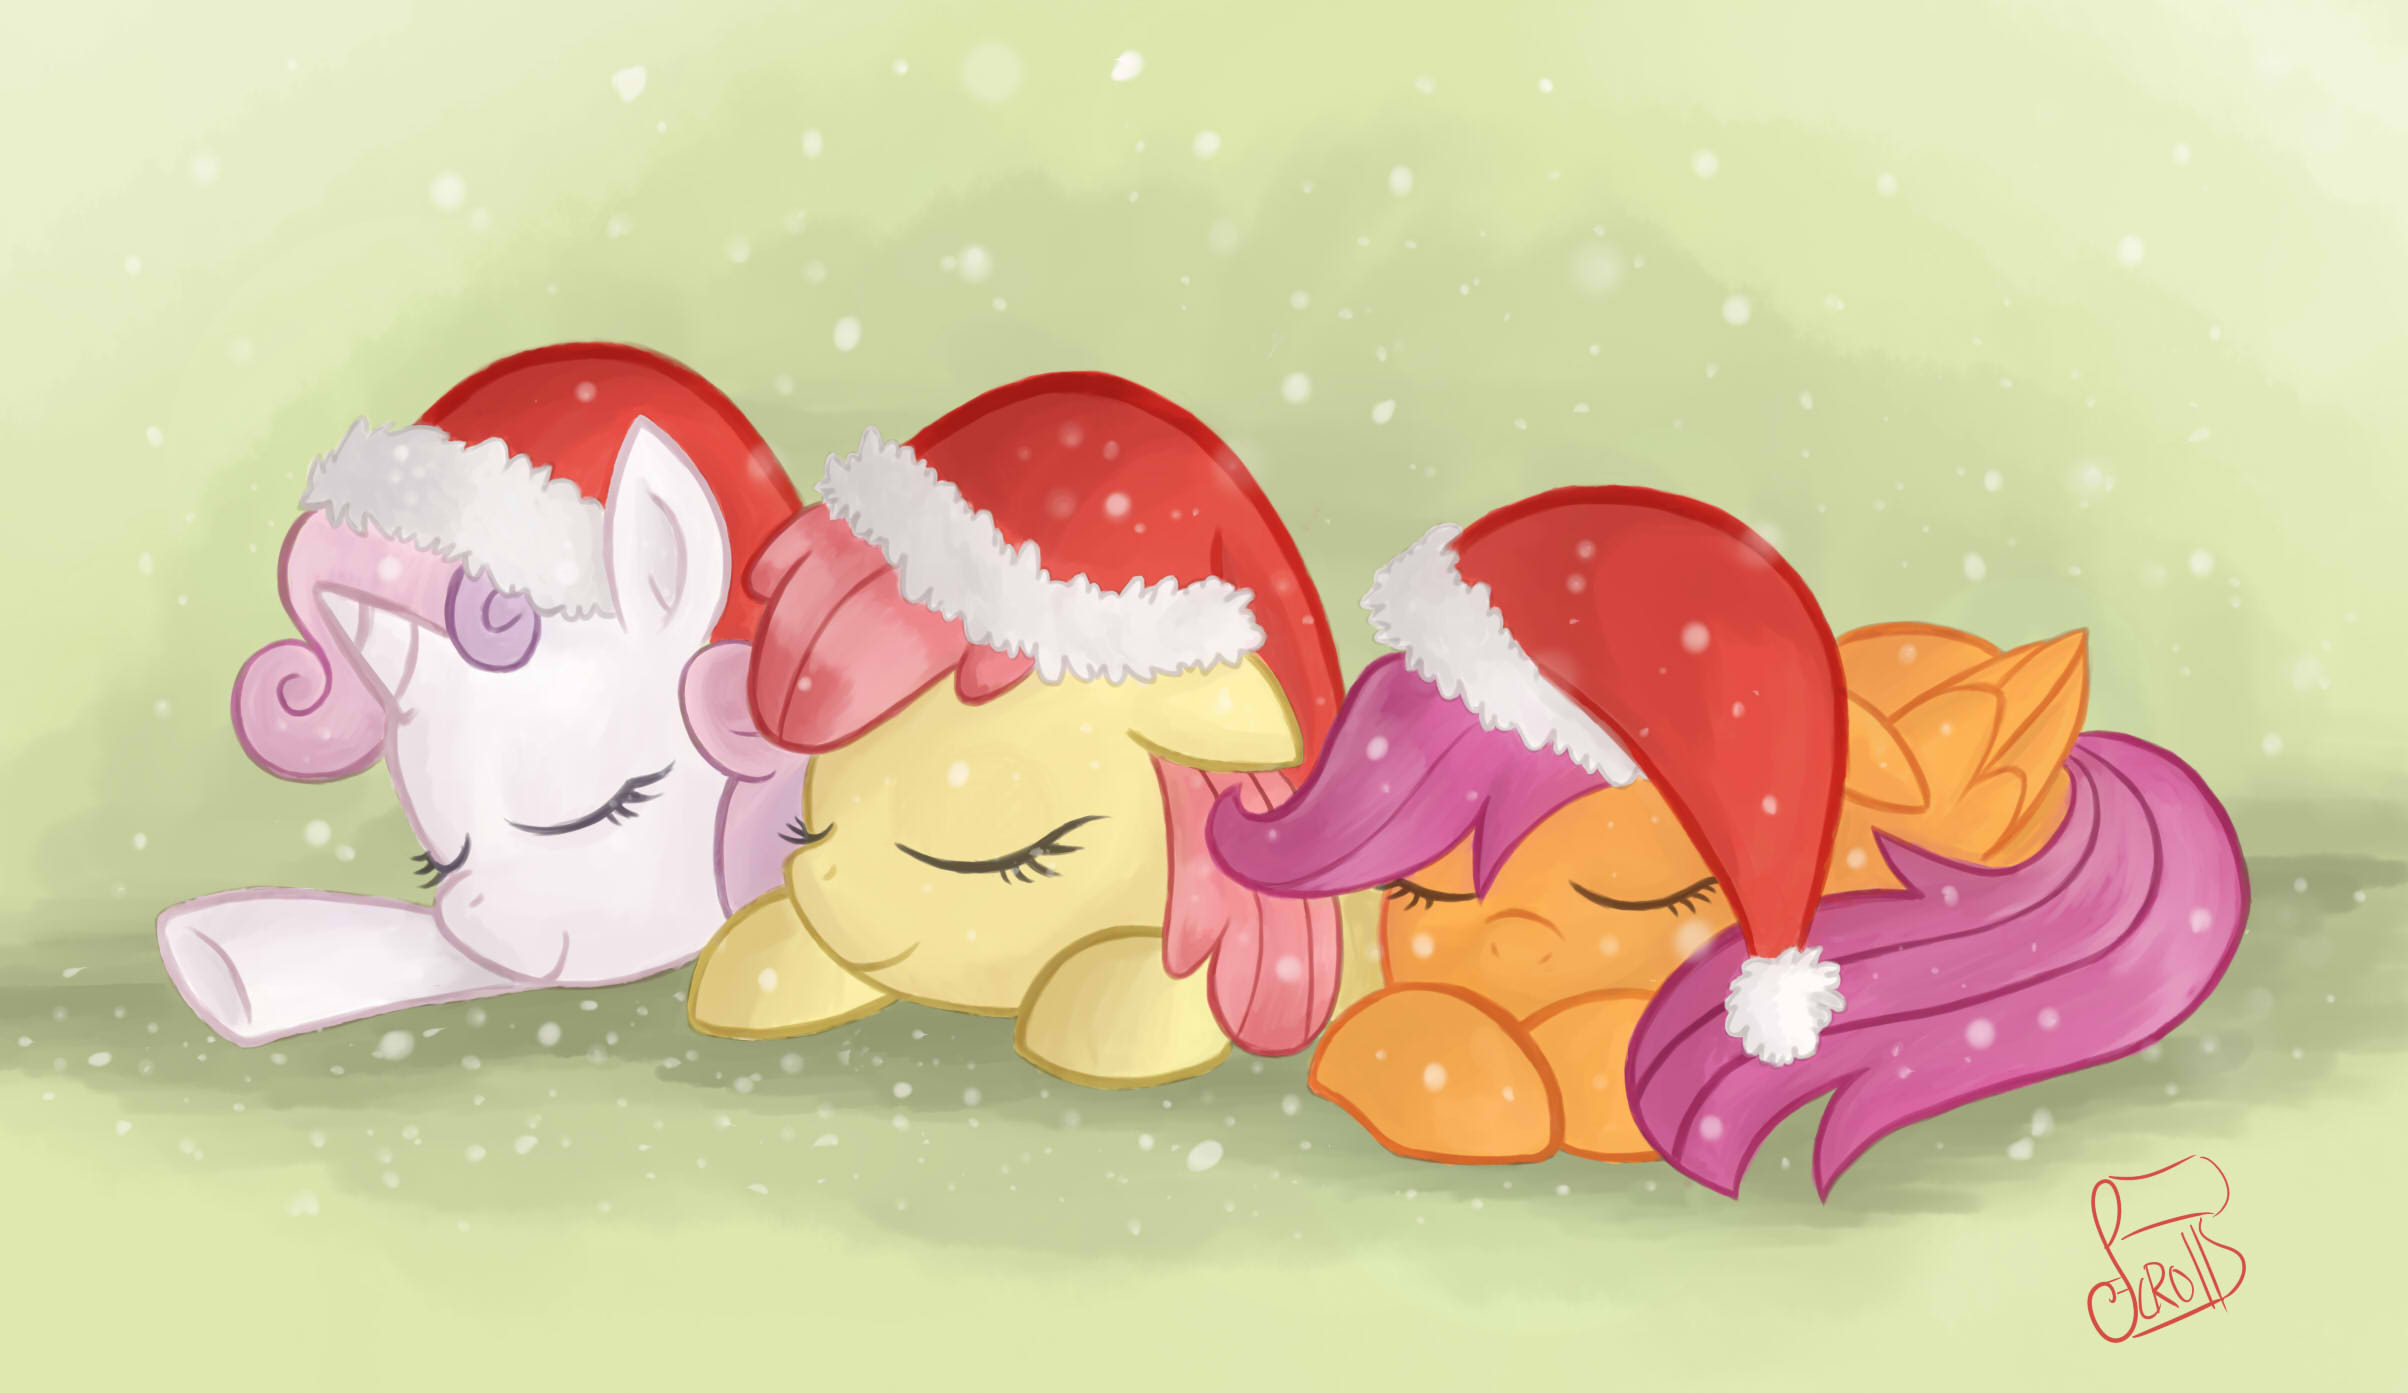 Crusaders at Christmas by CaineScroll